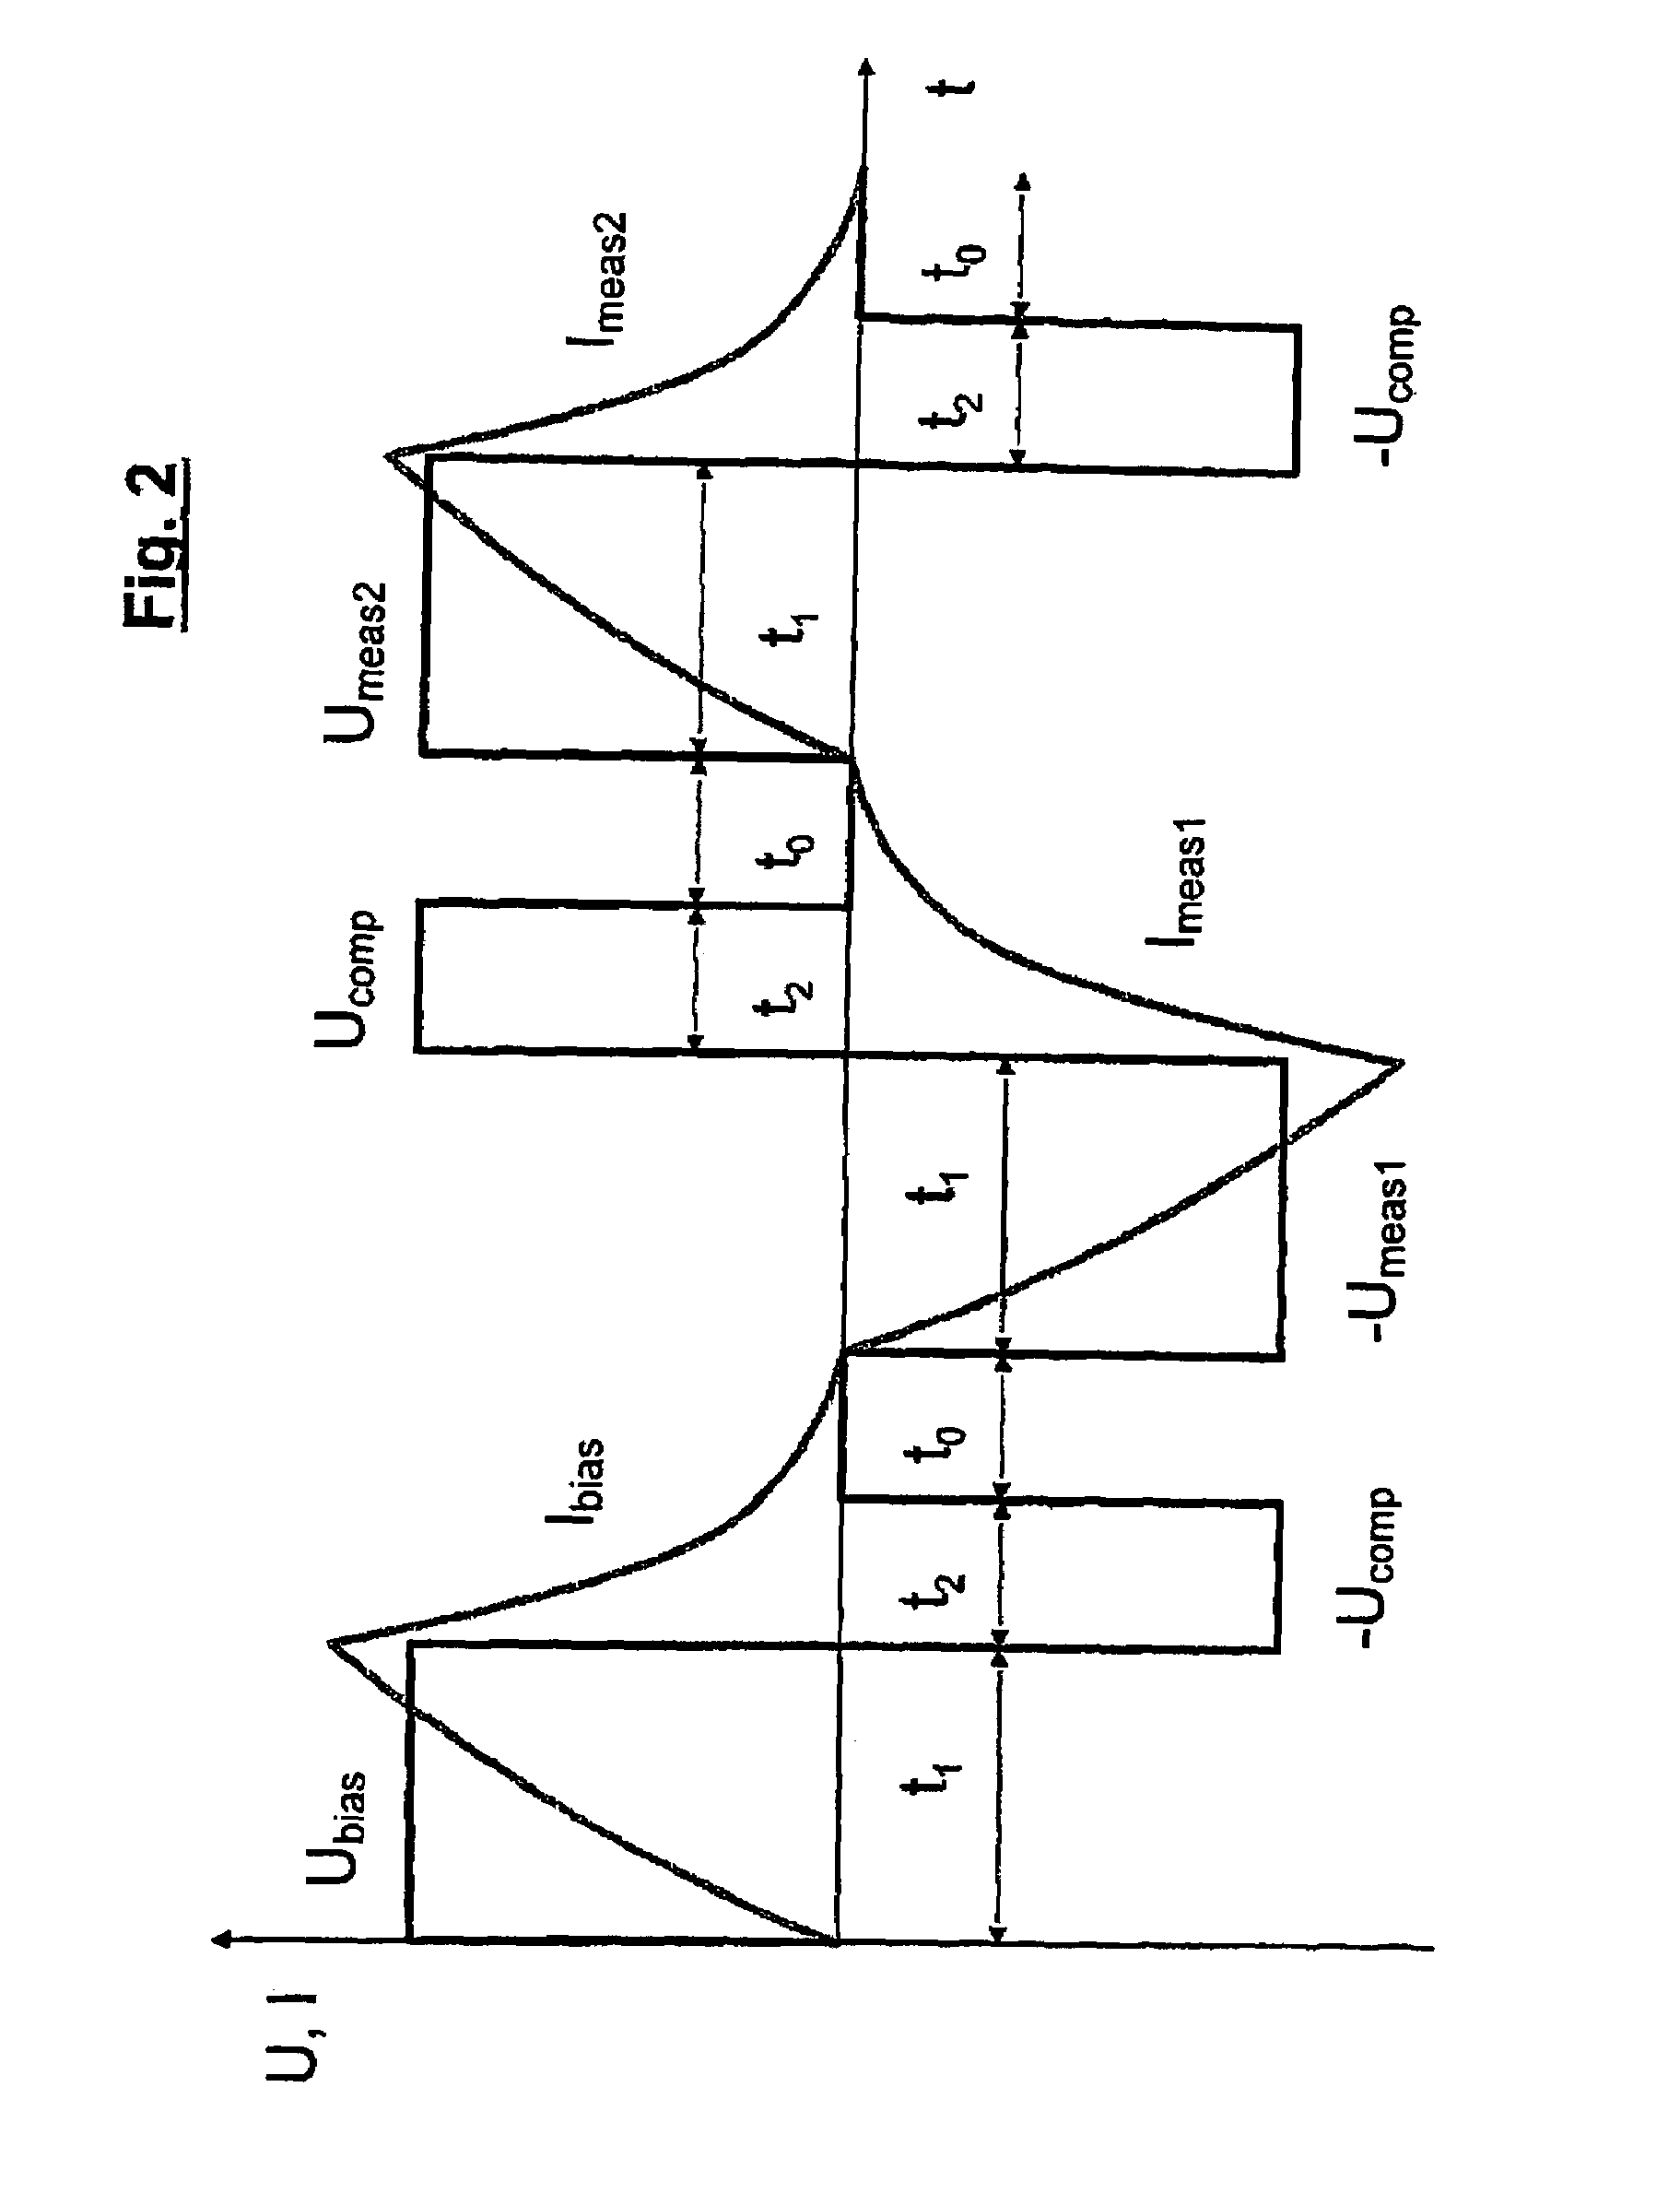 Method for determining the rotor position of a synchronous machine